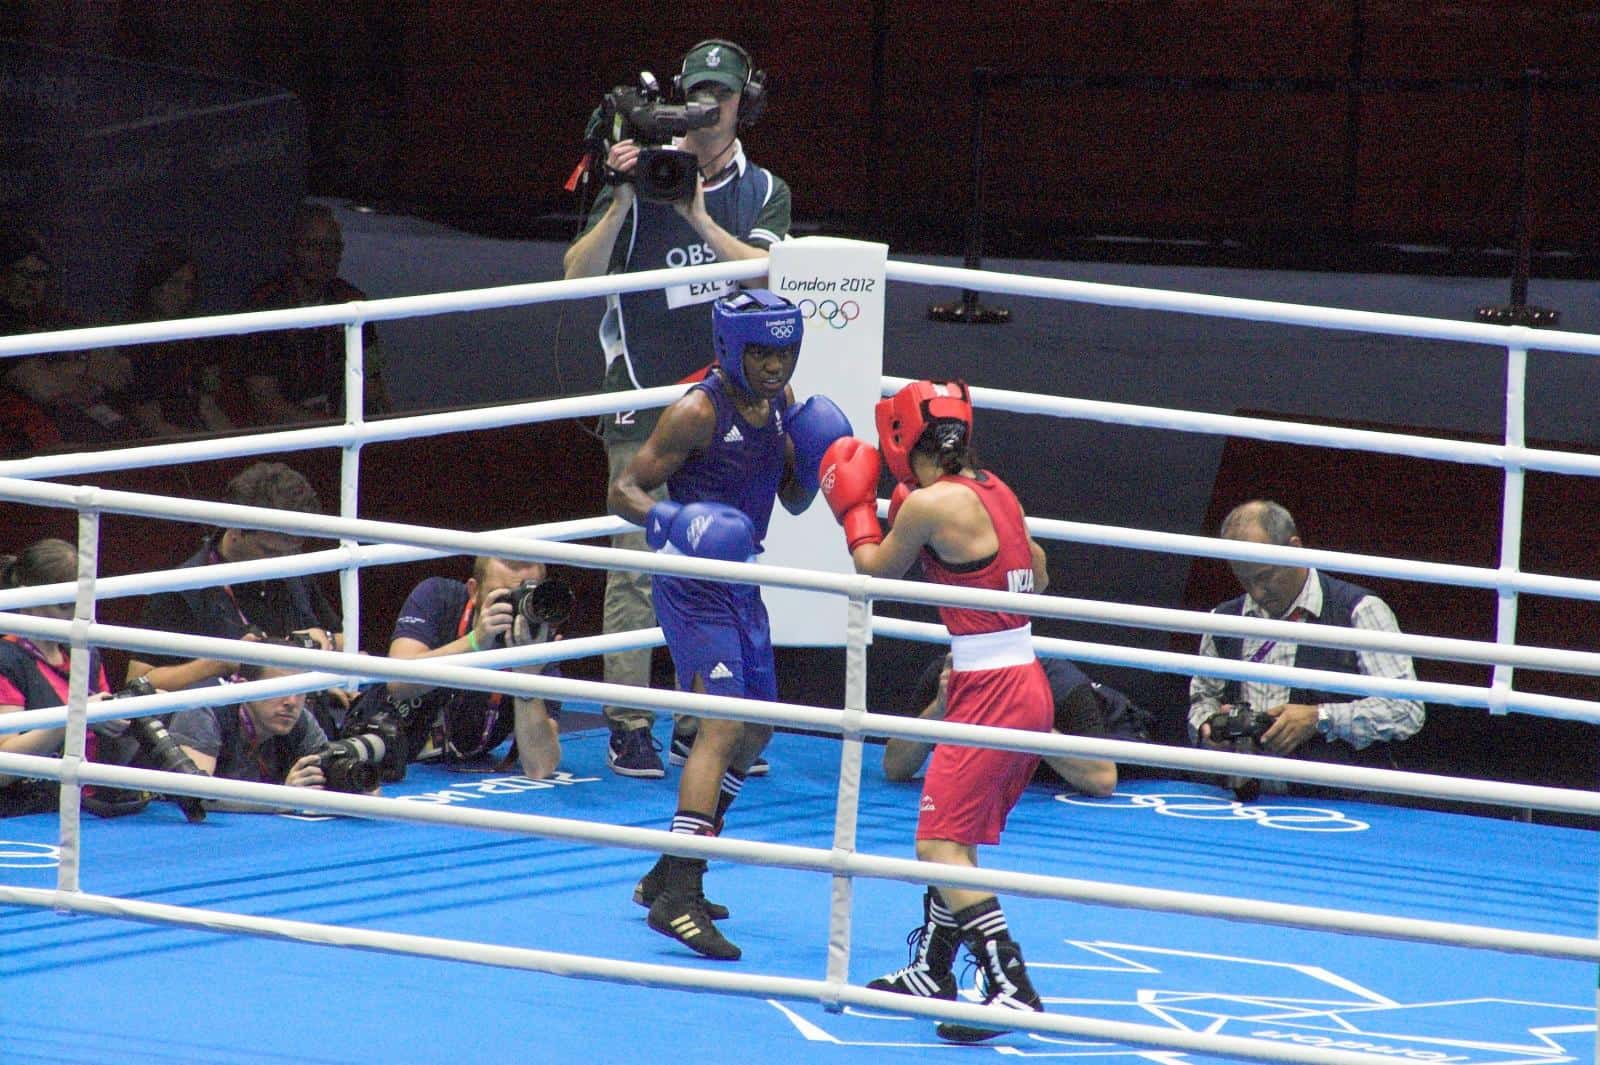 Mary Kom in the 2012 Olympics in London